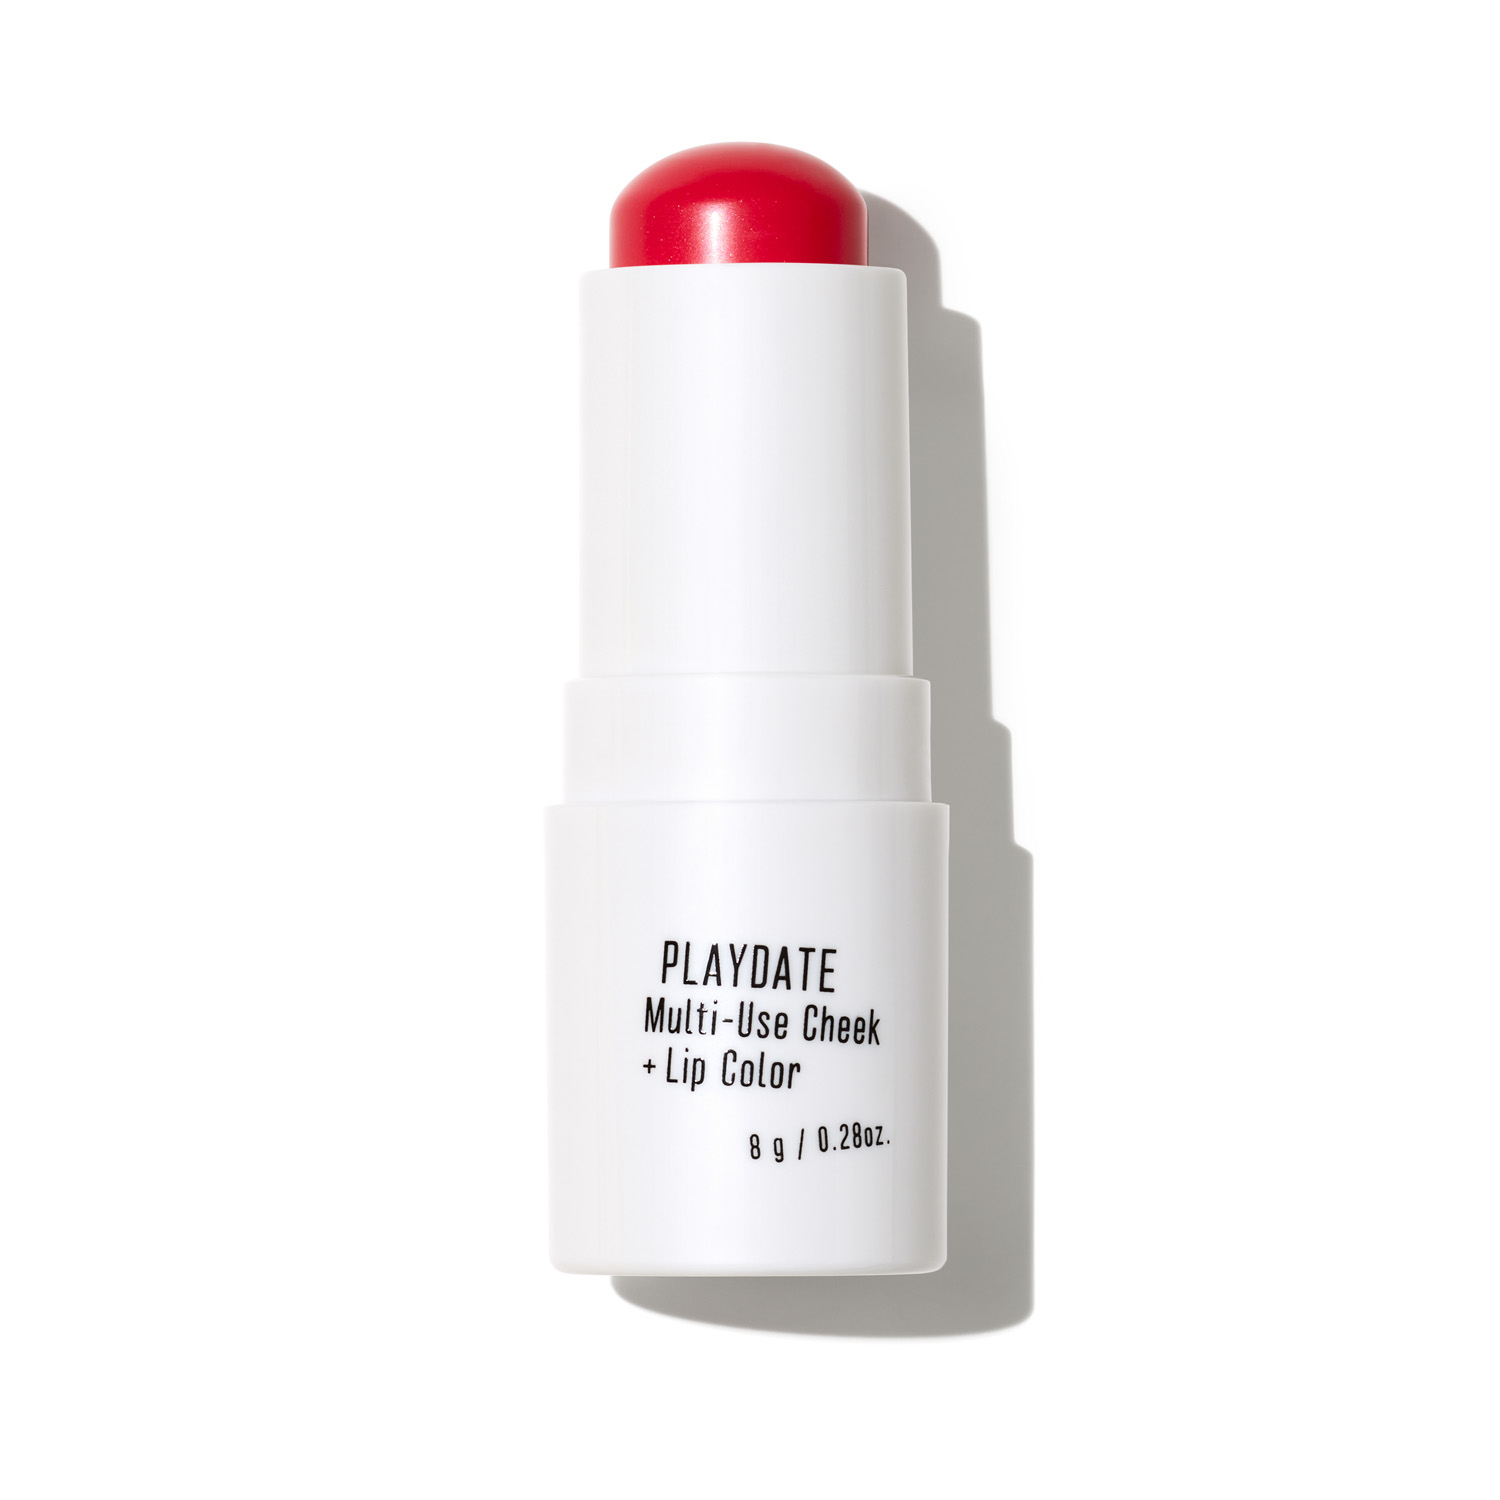 af94 Playdate Multi Use Lip and Cheek Tint, Bite Back, Red - image 1 of 6